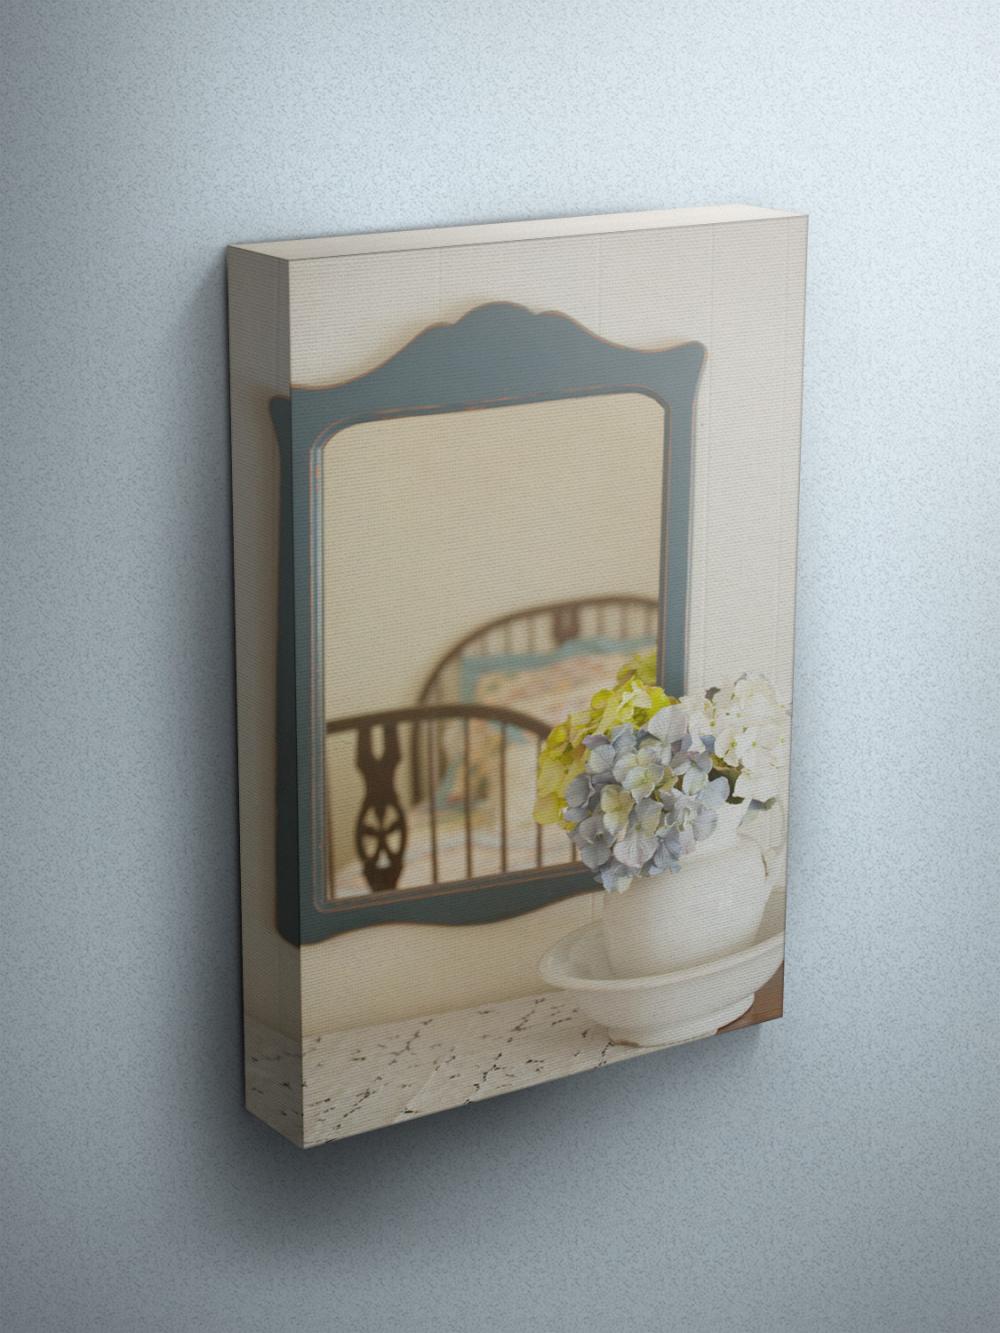 Vintage Bedroom Dresser - Fine Art Photograph On Gallery Wrapped Canvas - 16x12" & More